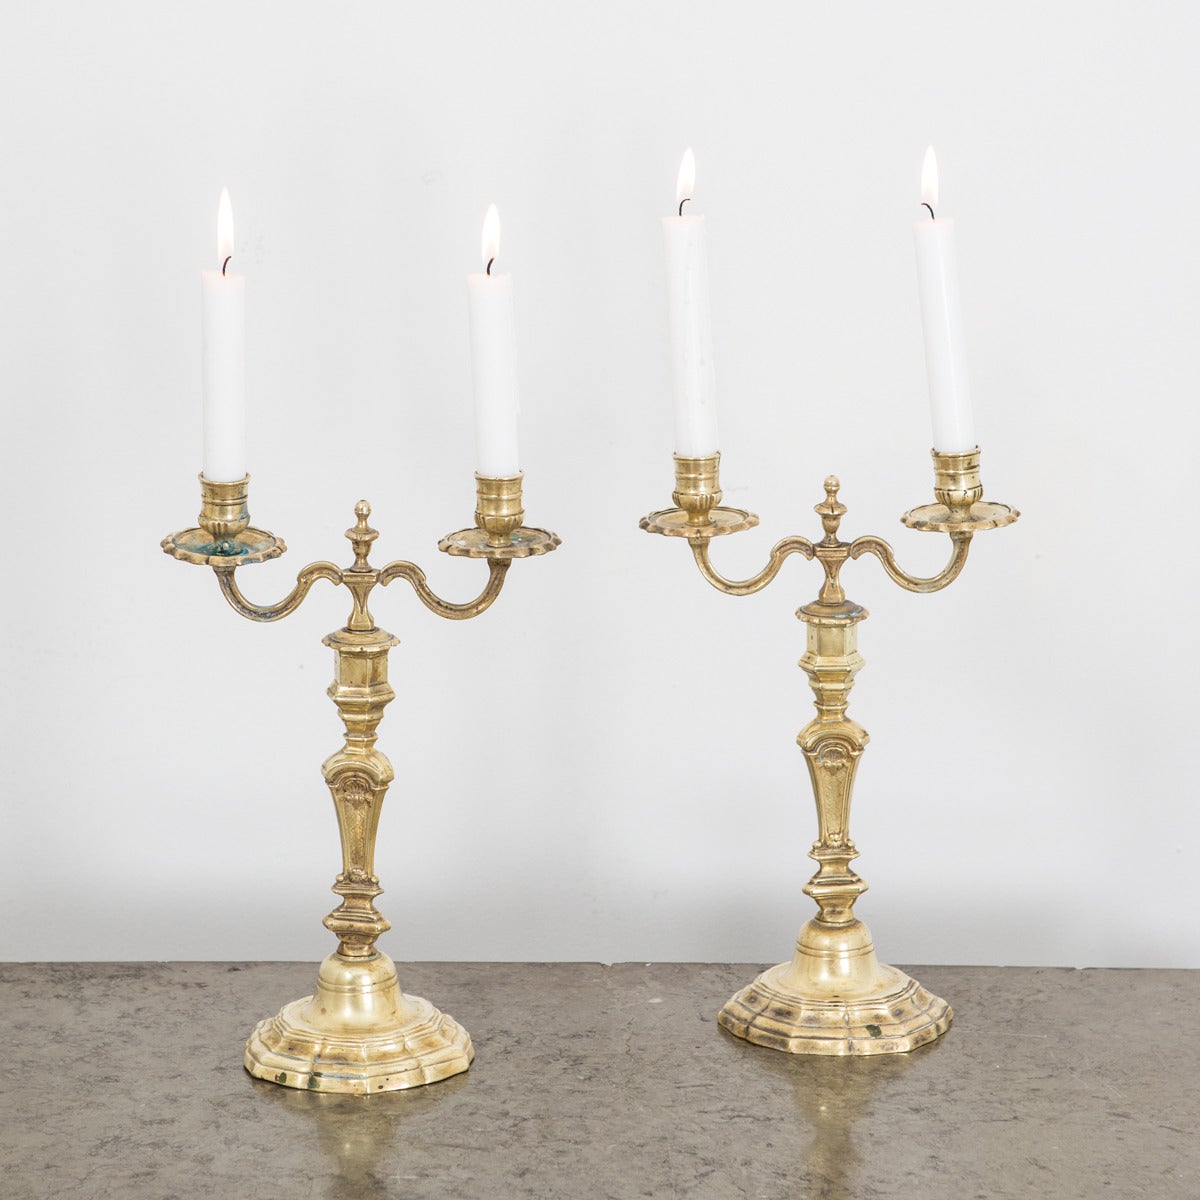 A pair of French brass candelabras made during the Baroque period ca 1700. 2 arms on each candelabra for candles. 